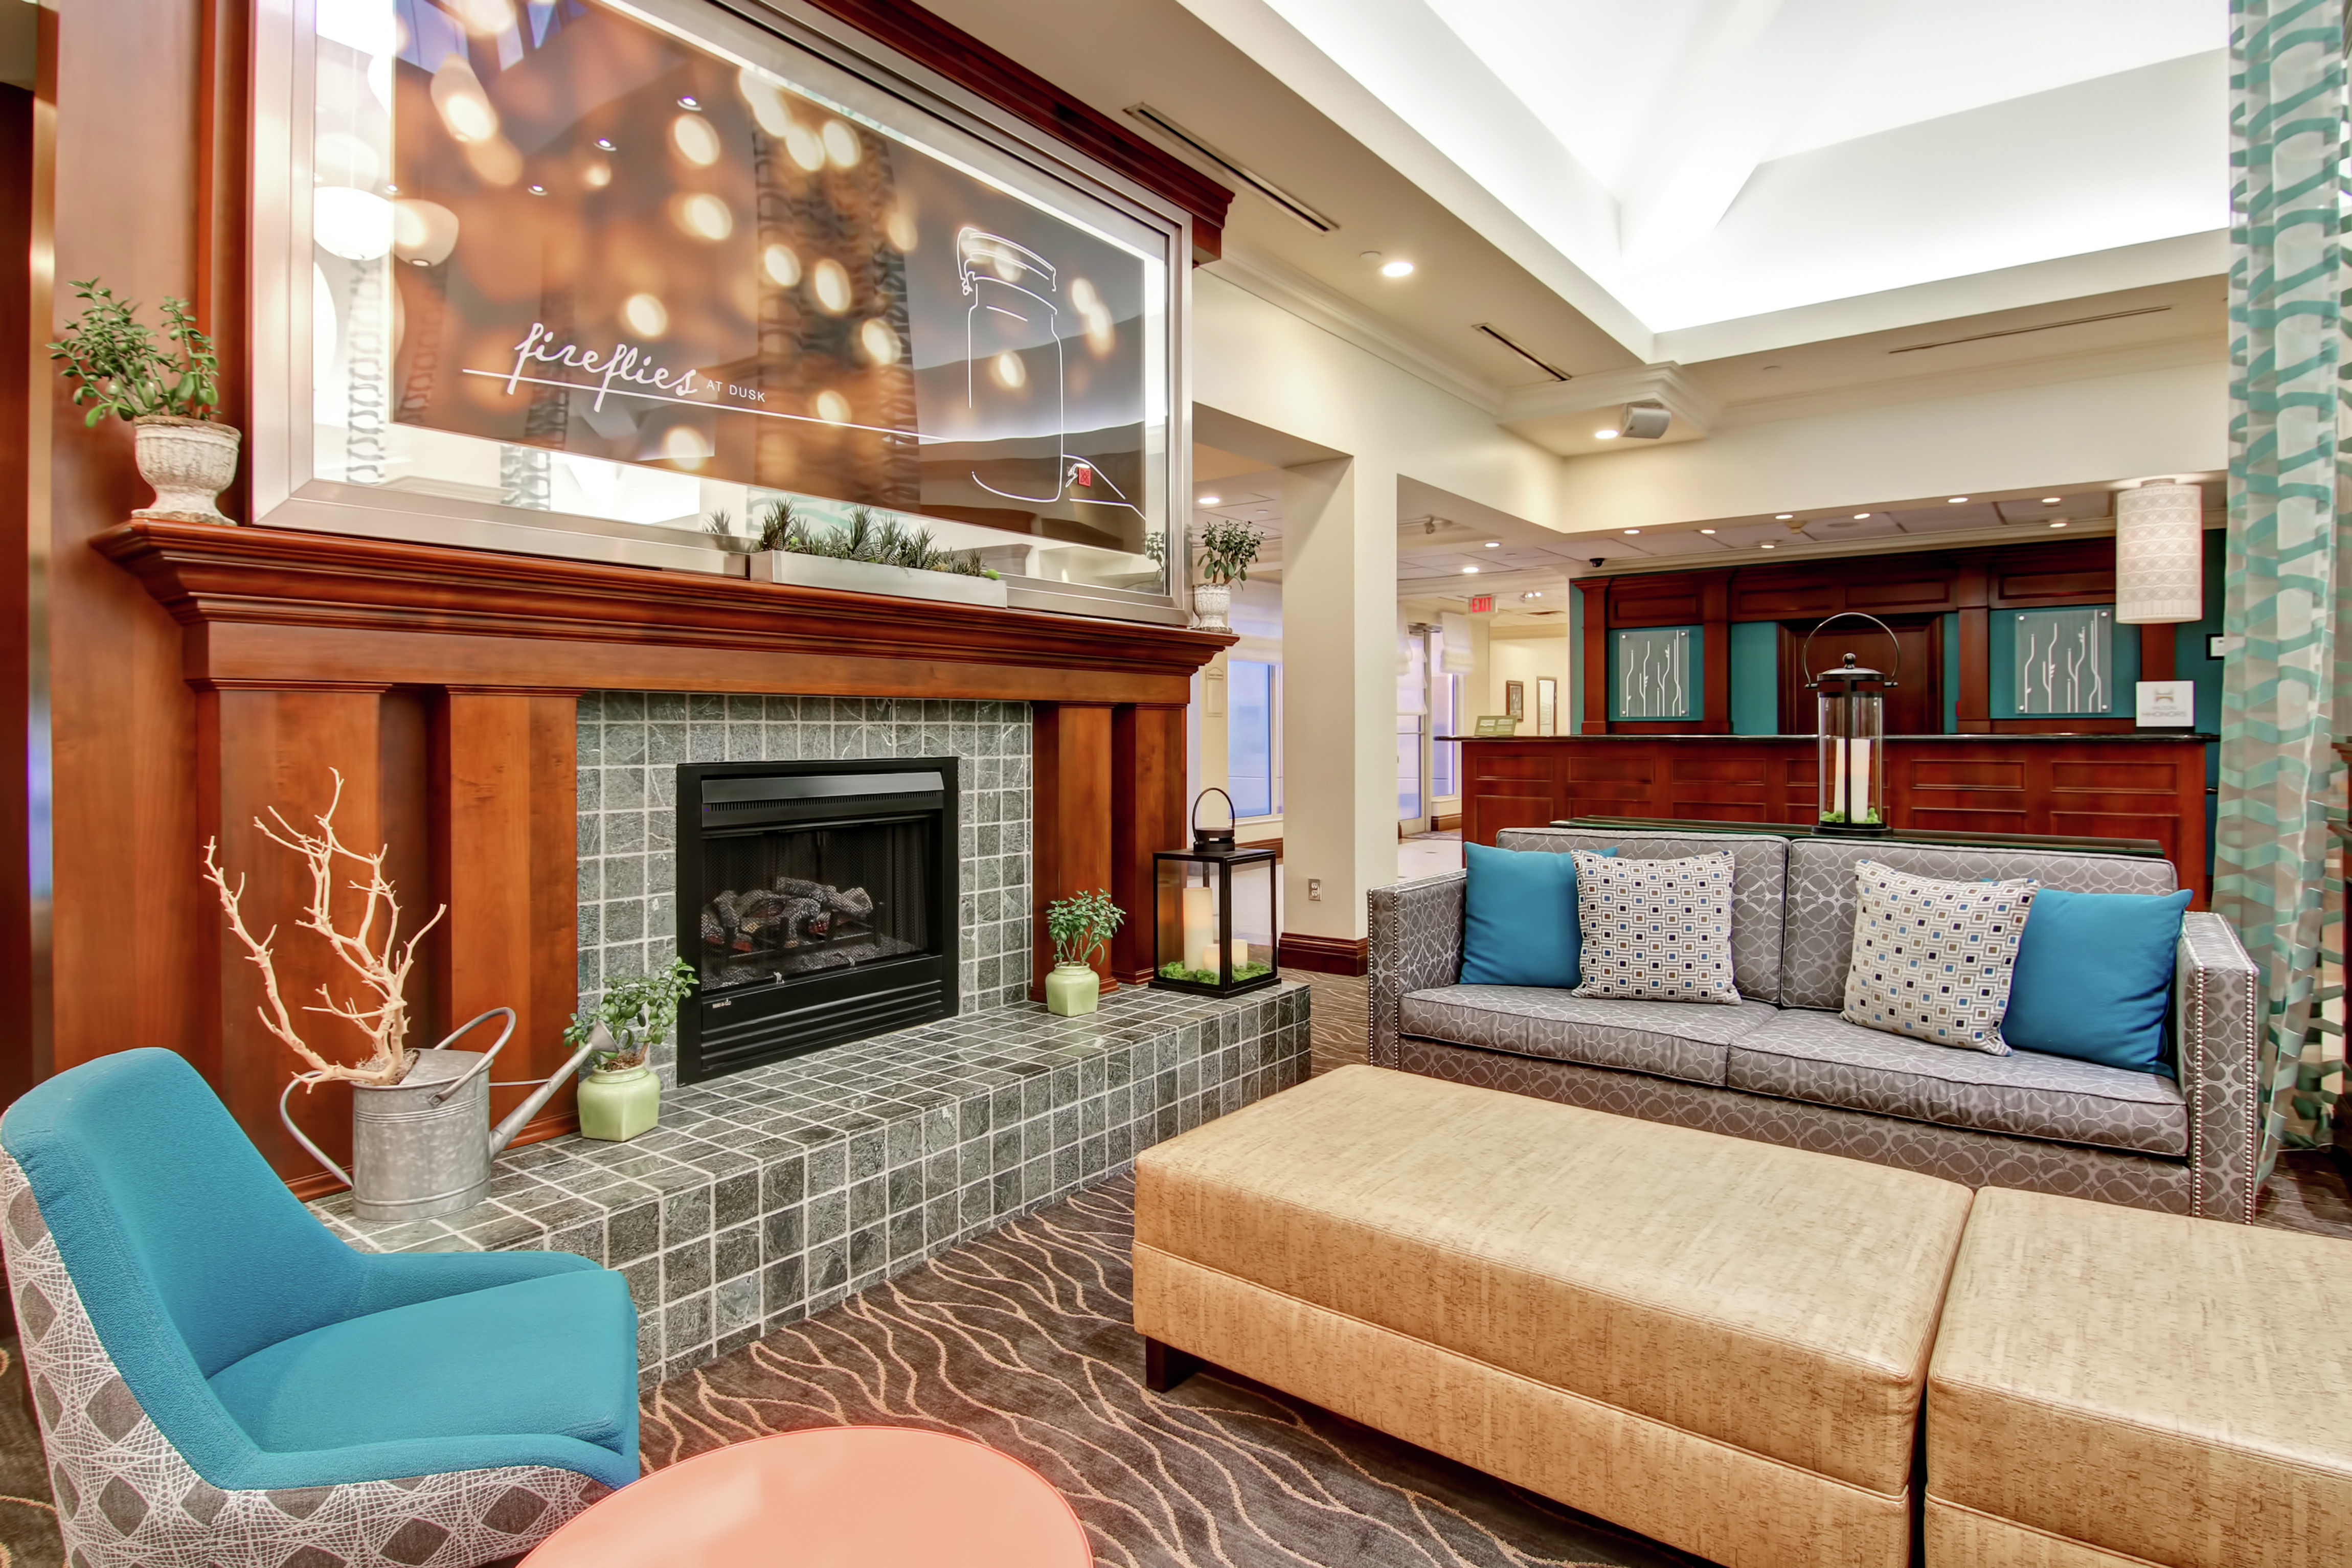 Lobby and Lounge Area with Elegant Fireplace 